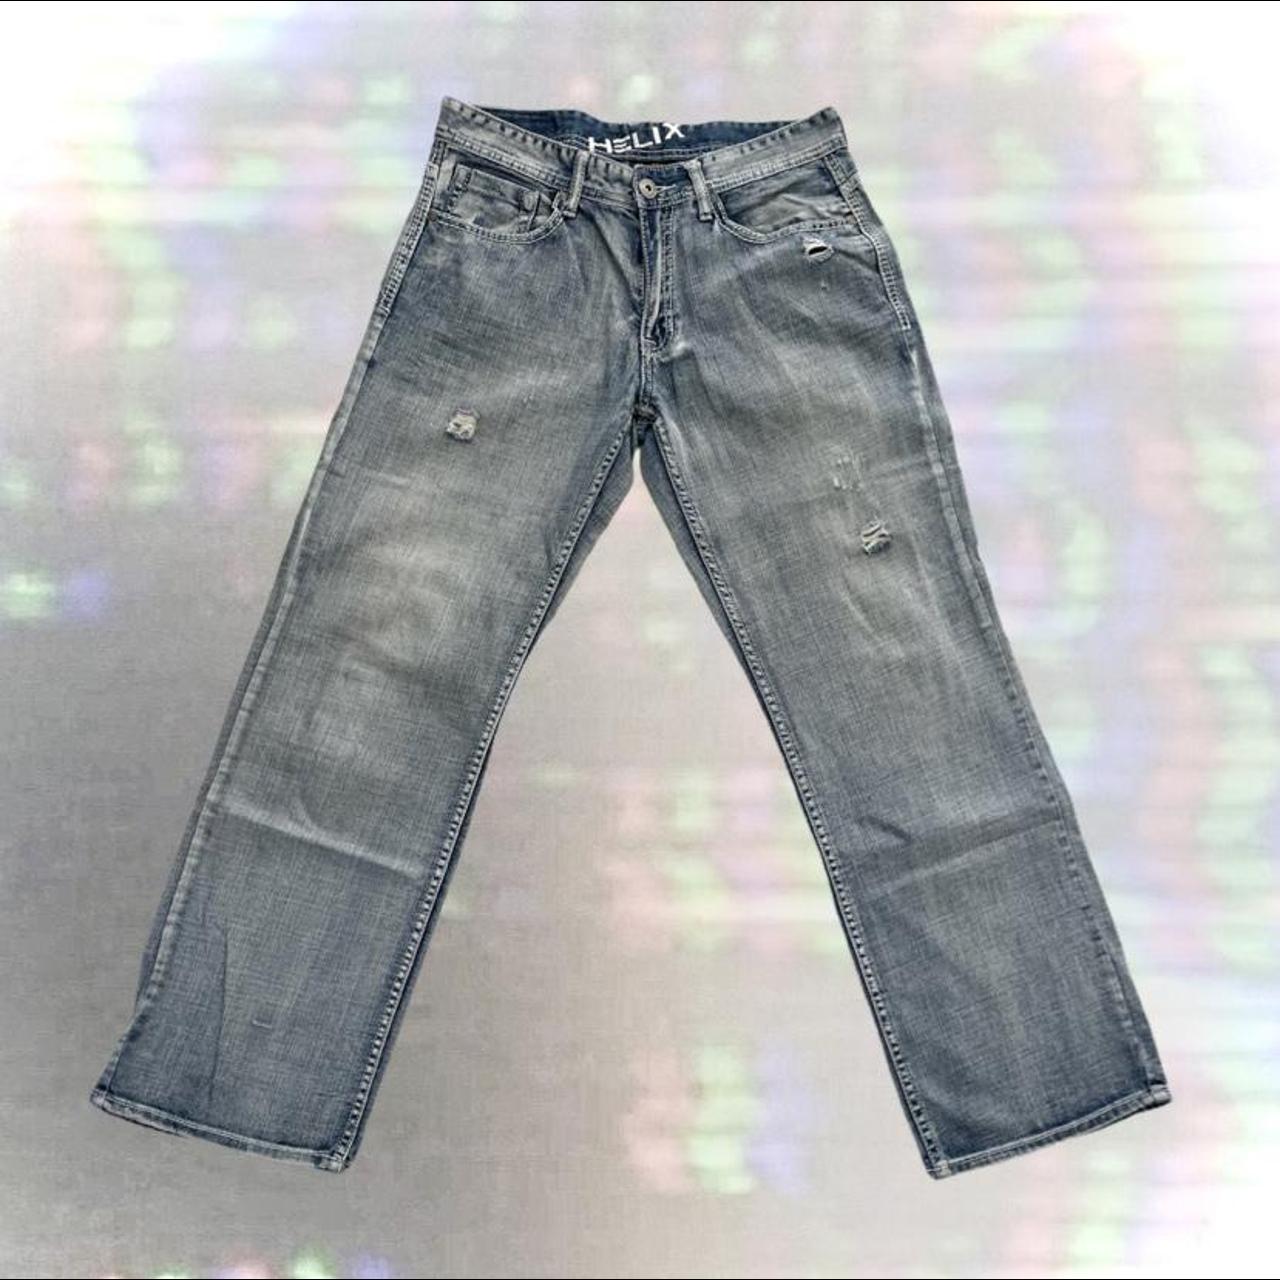 Product Image 2 - 2000s HELIX Jeans Baggy Straight